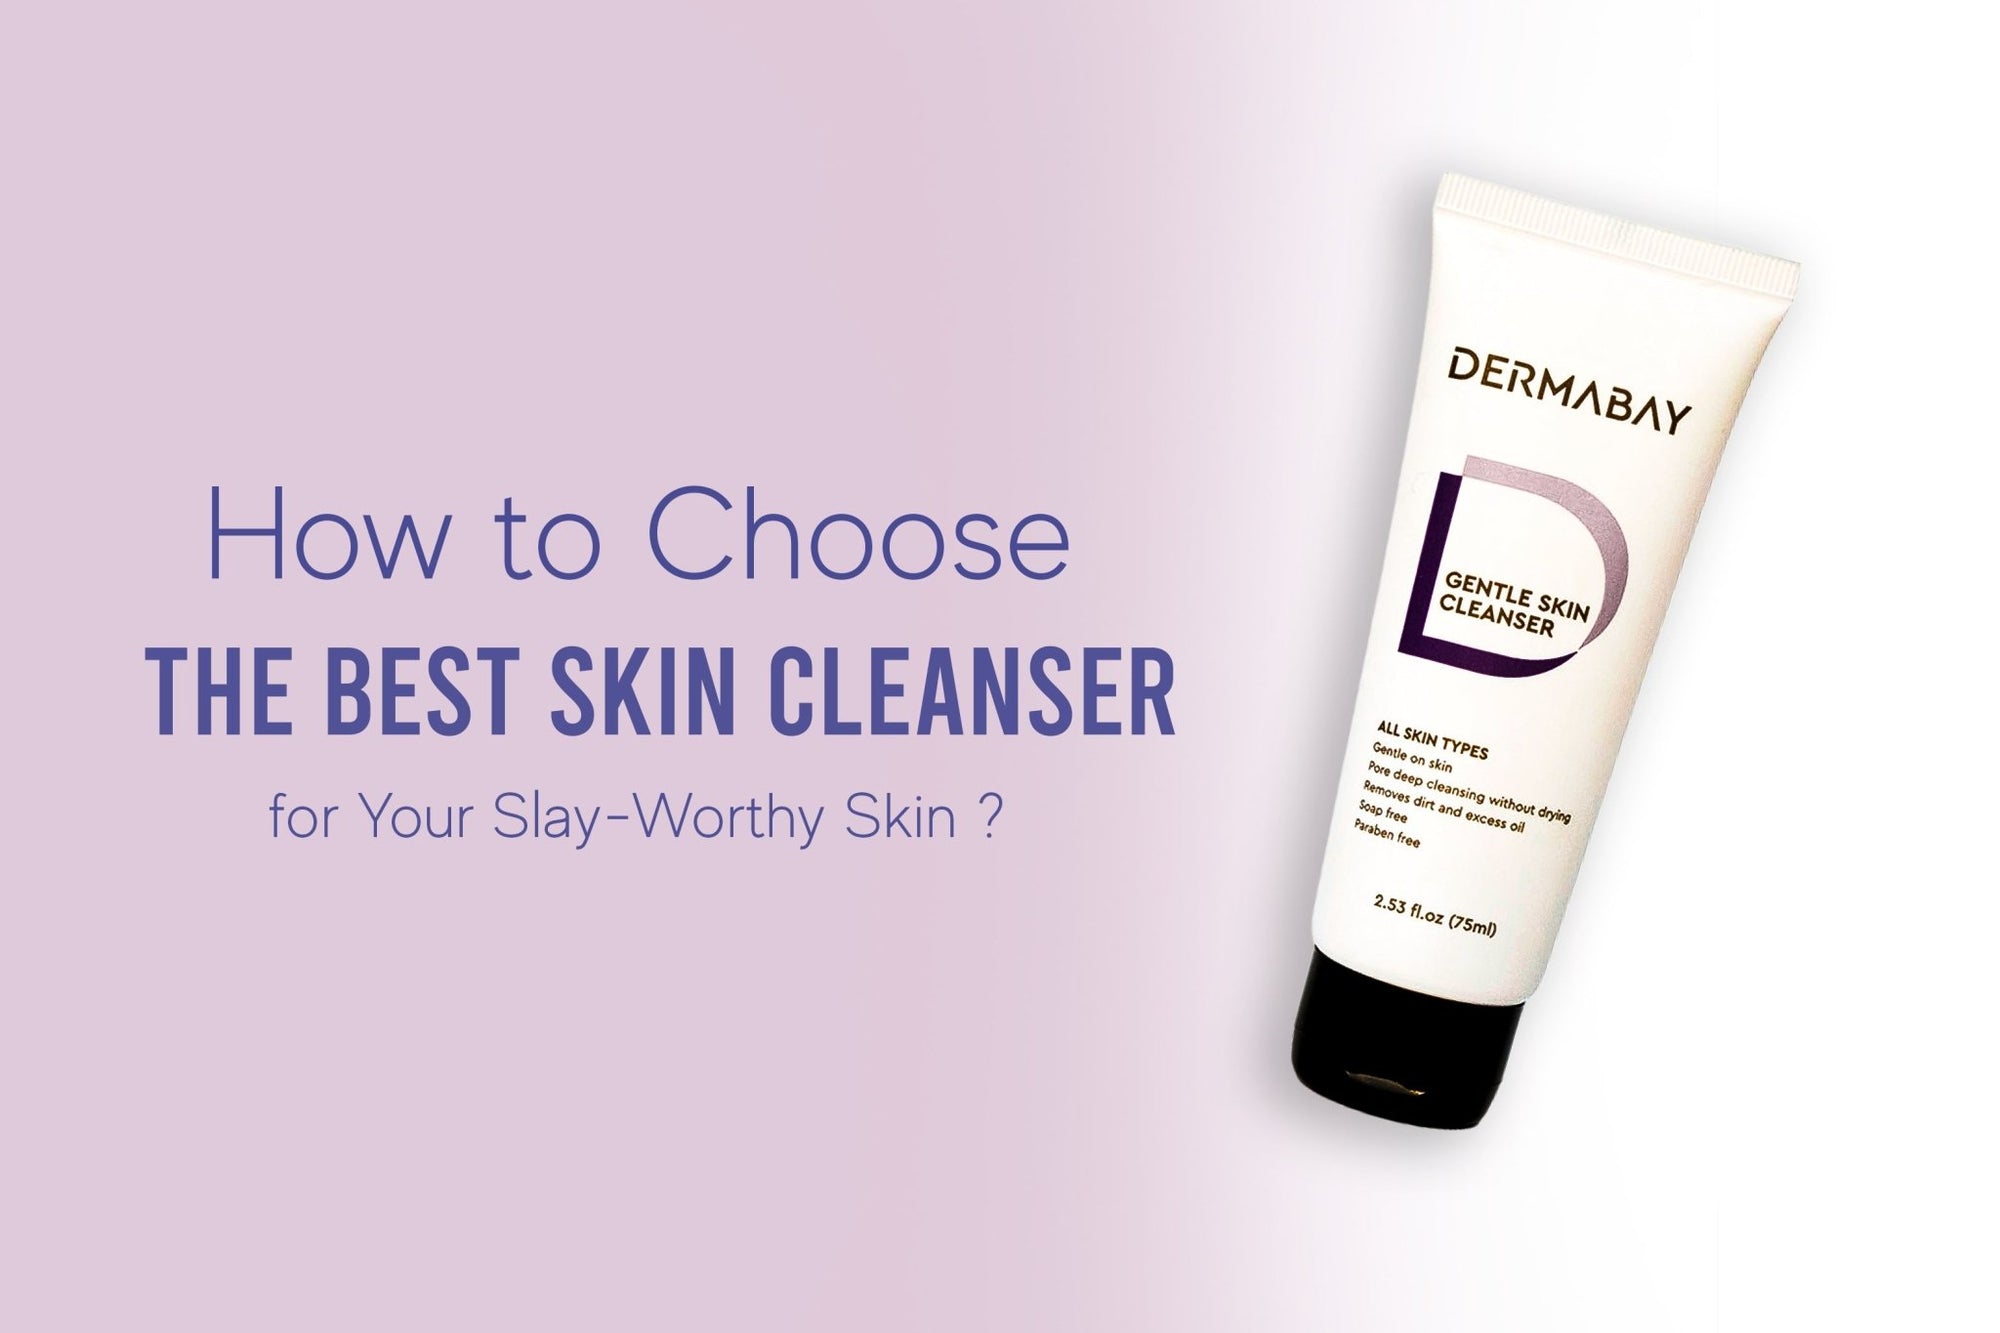 How to Choose the Best Skin Cleanser for Your Slay-Worthy Skin? - Dermabay